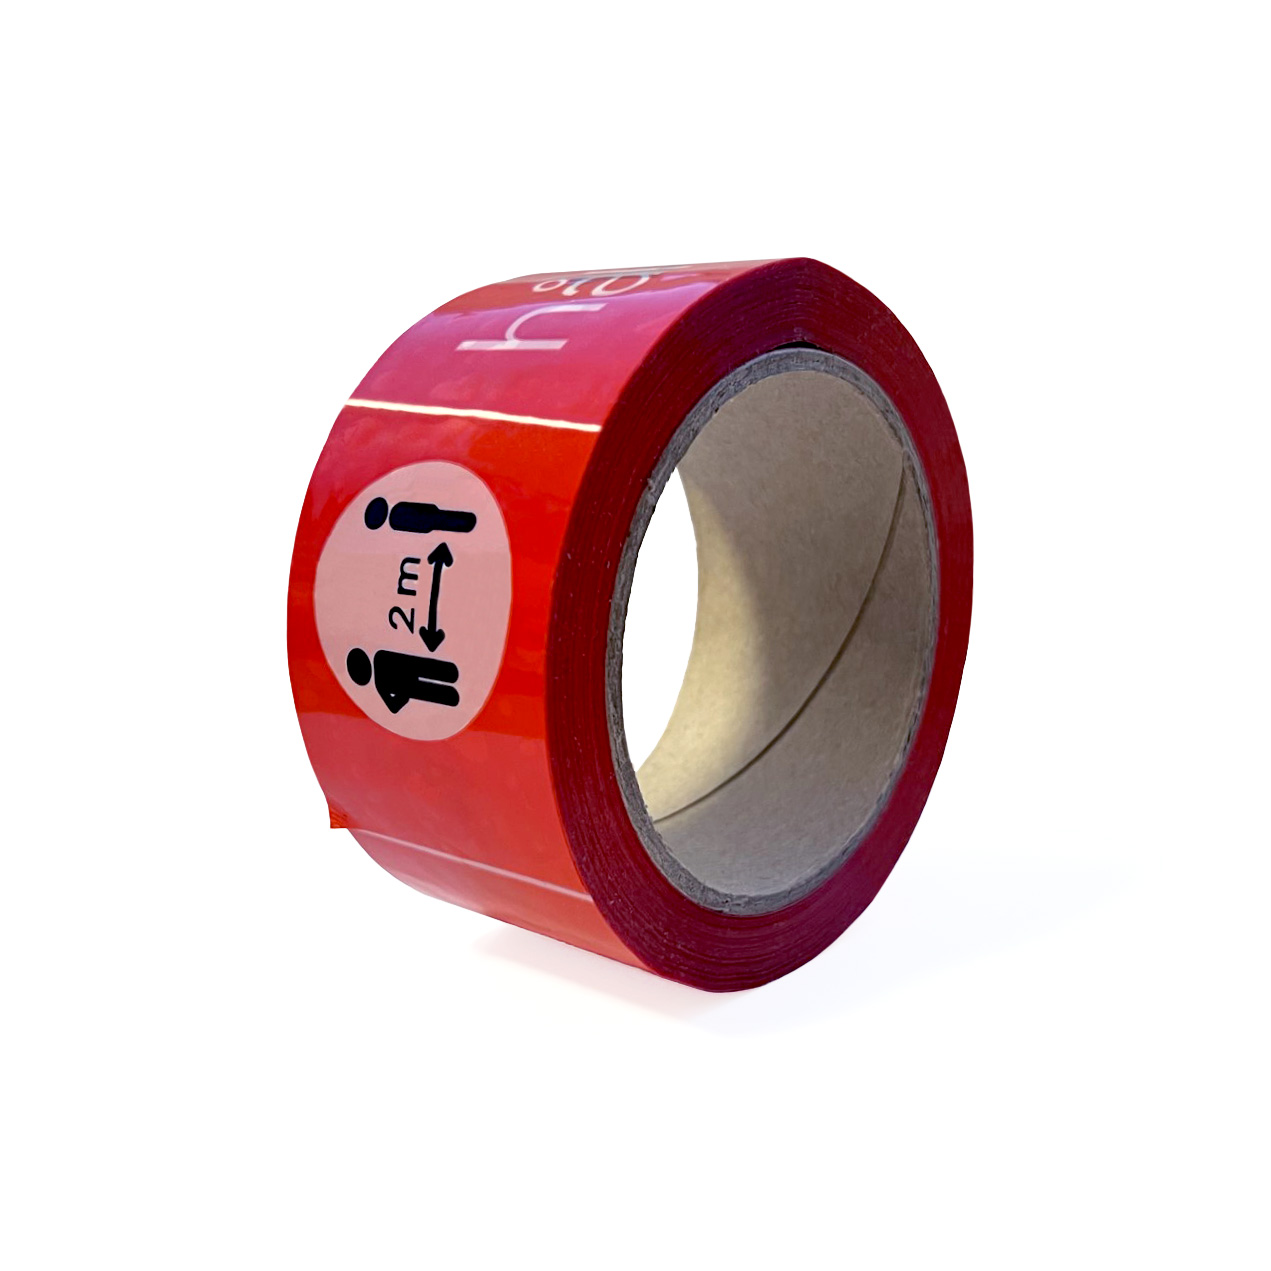 Floor marking tape with print